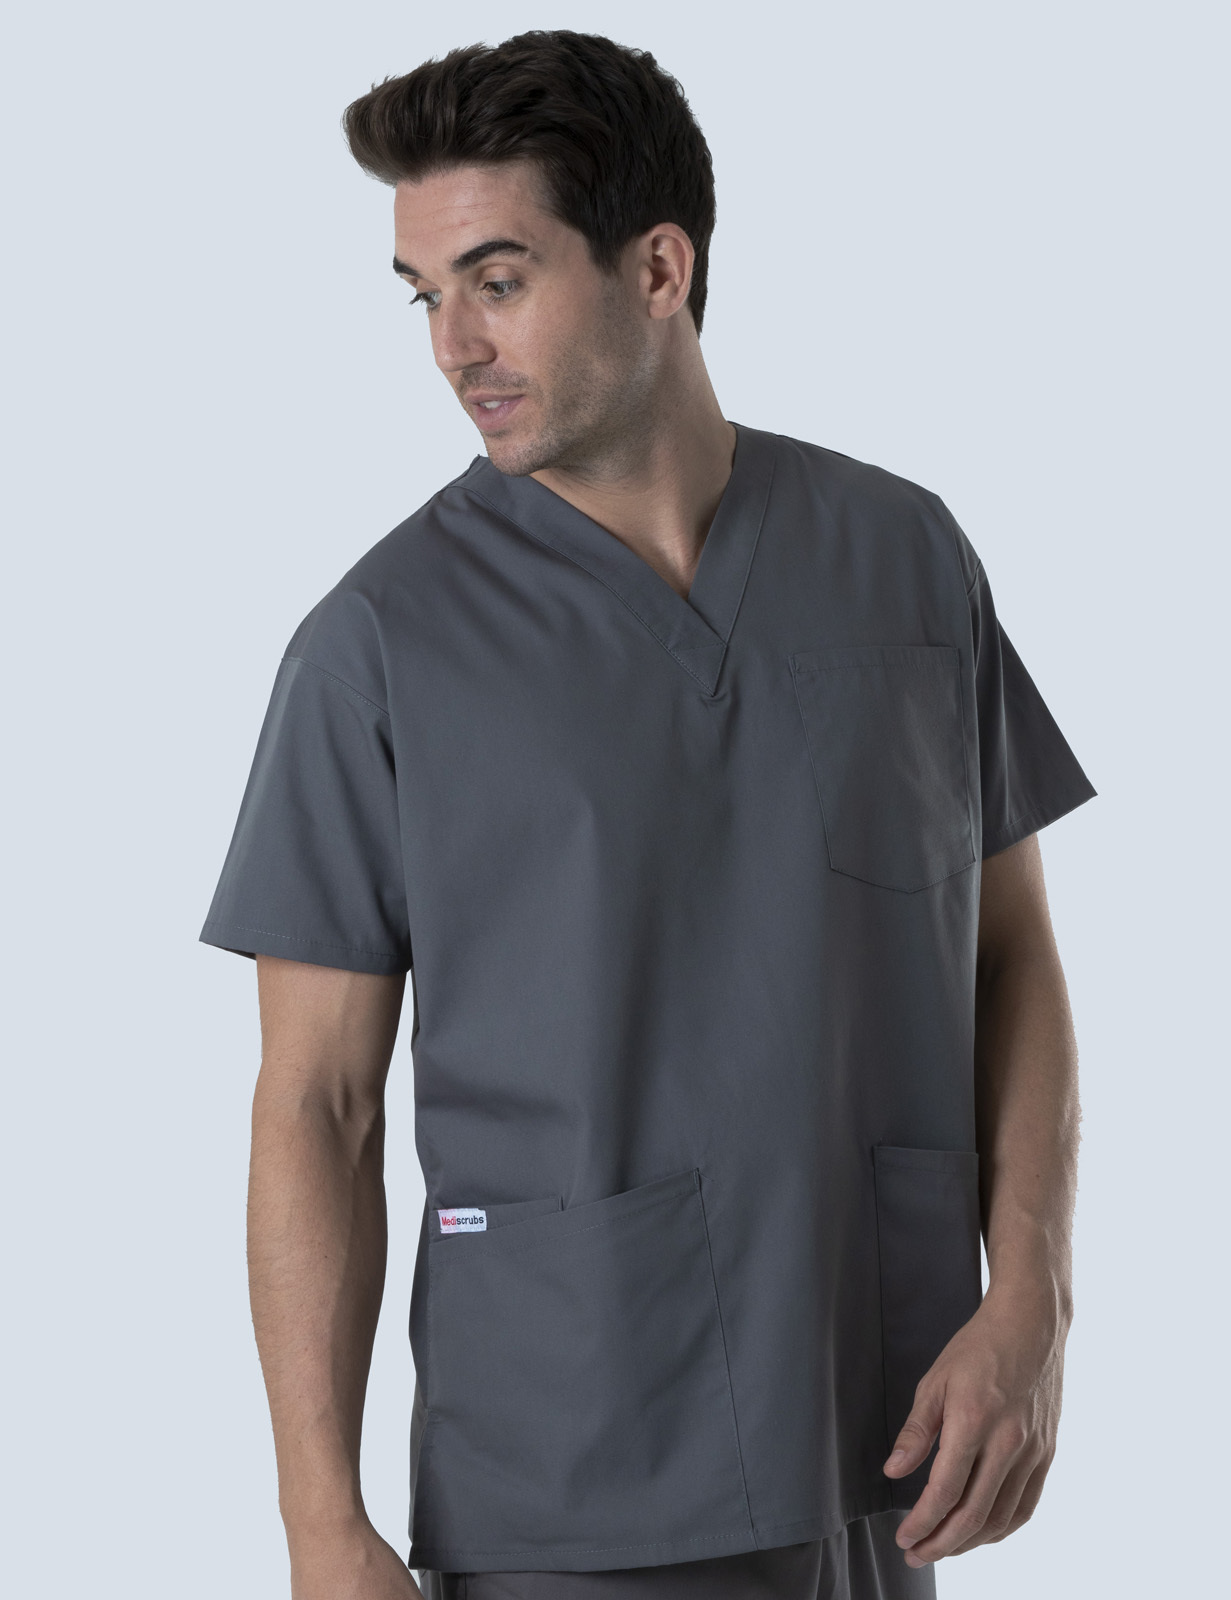 Nambour Hospital - RN Emergency (4 Pocket Scrub Top and Cargo Pants in Steel Grey incl Logos)